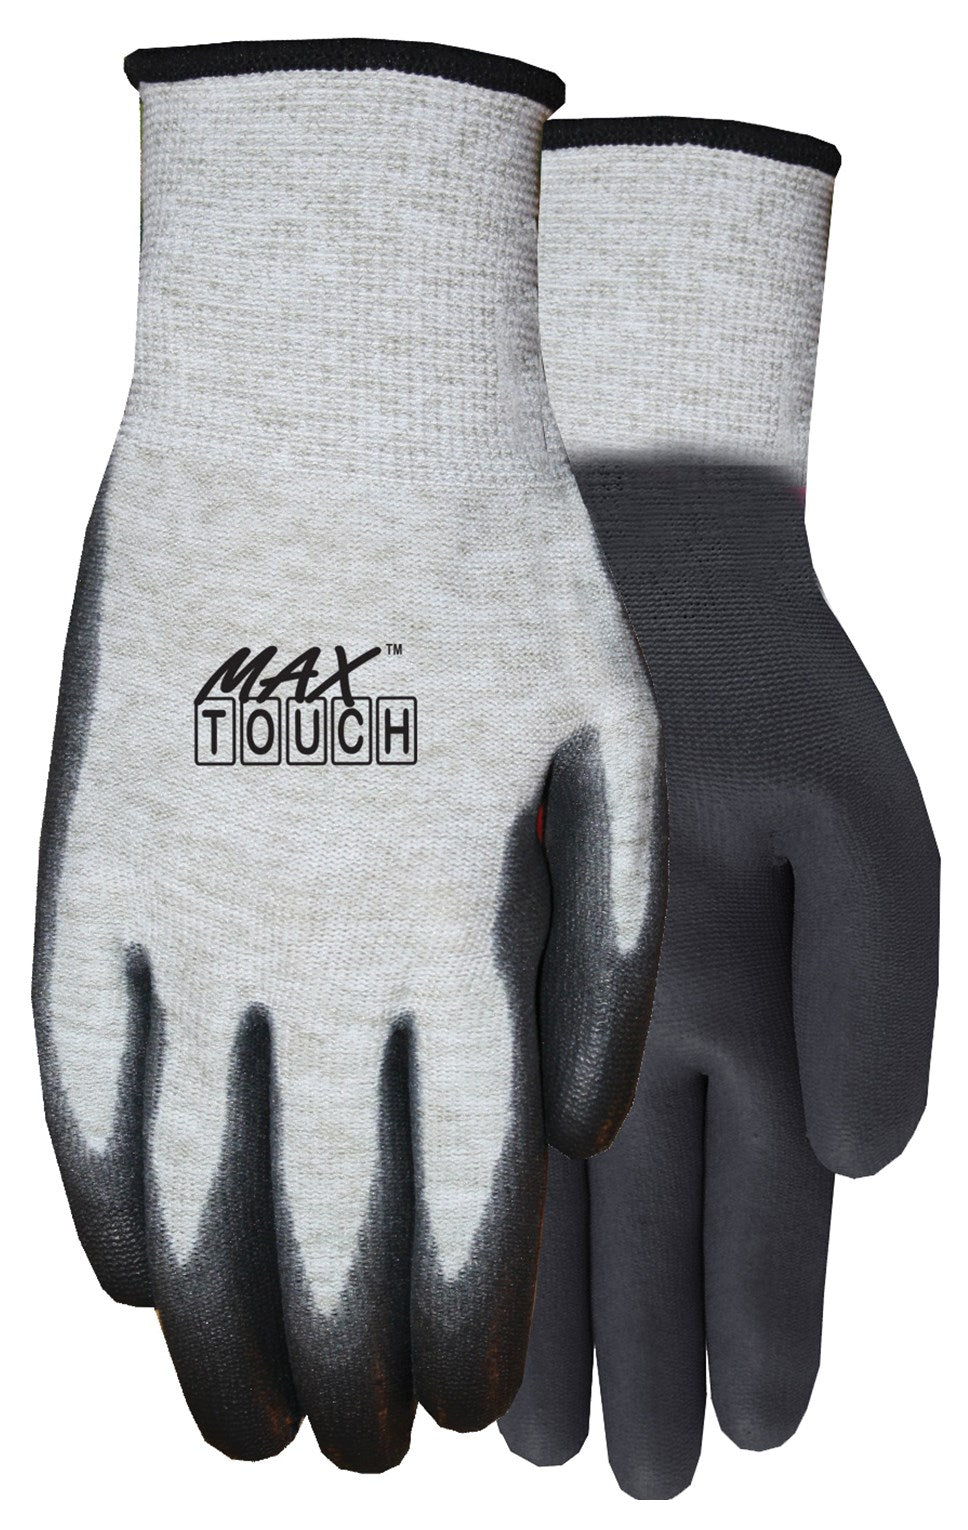 MIDWEST QUALITY GLOVES INC, Midwest Quality Gloves Copper & Nylon Blend Liner Snug Fit Men's Max Touch Gloves (Pack of 6)